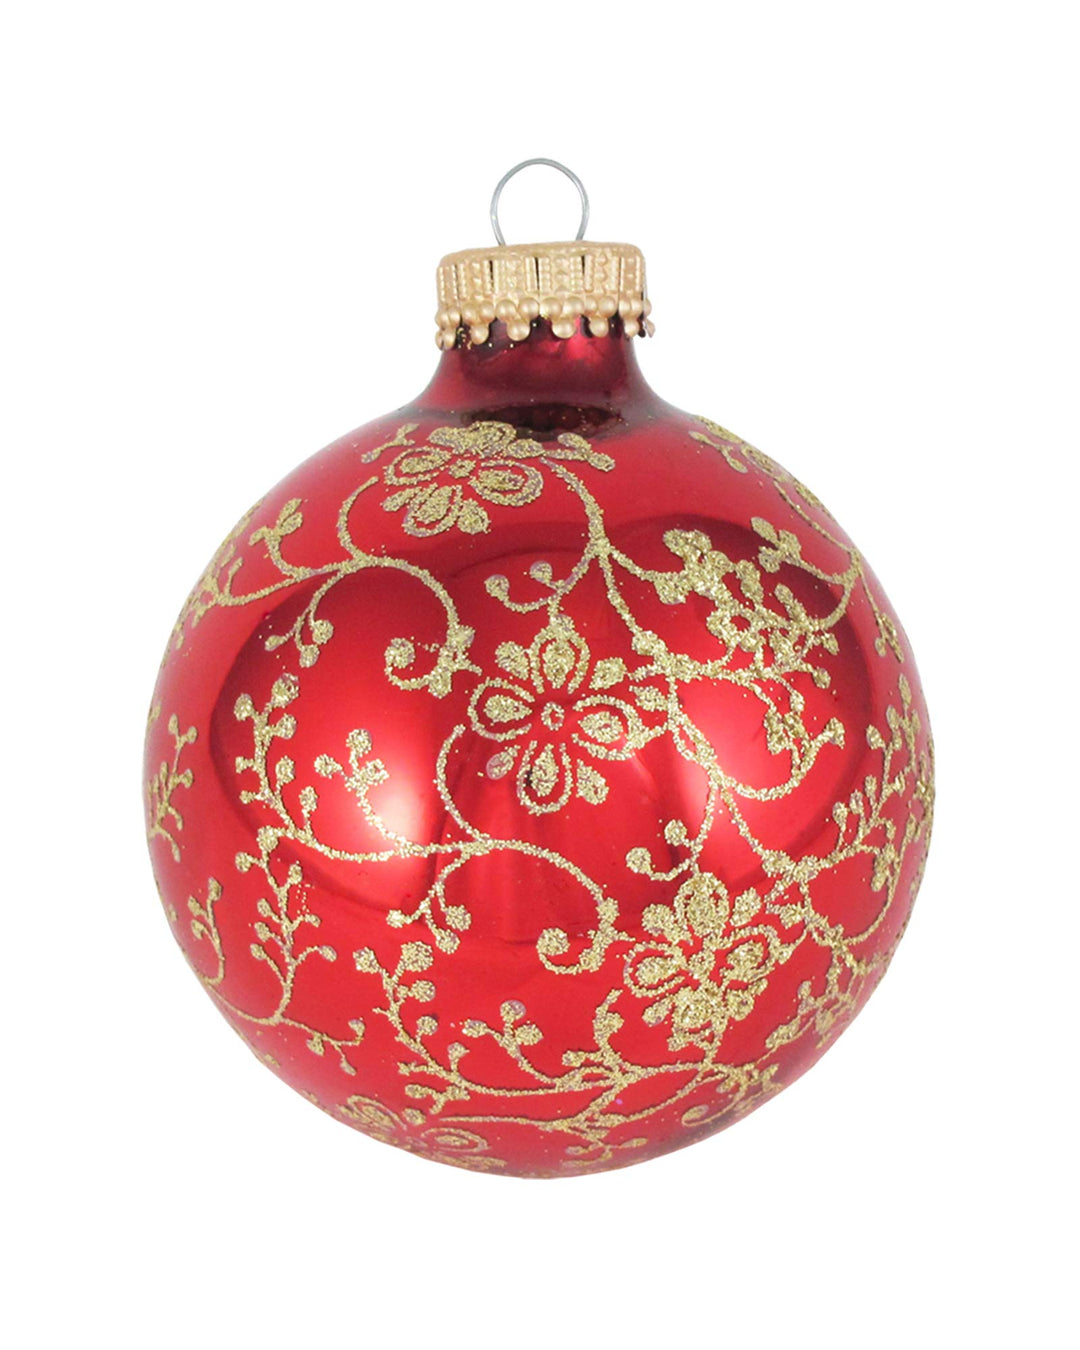 Glass Christmas Tree Ornaments - 67mm/2.63" [4 Pieces] Decorated Balls from Christmas by Krebs Seamless Hanging Holiday Decor (Christmas Red with Gold Floral Glitterlace)